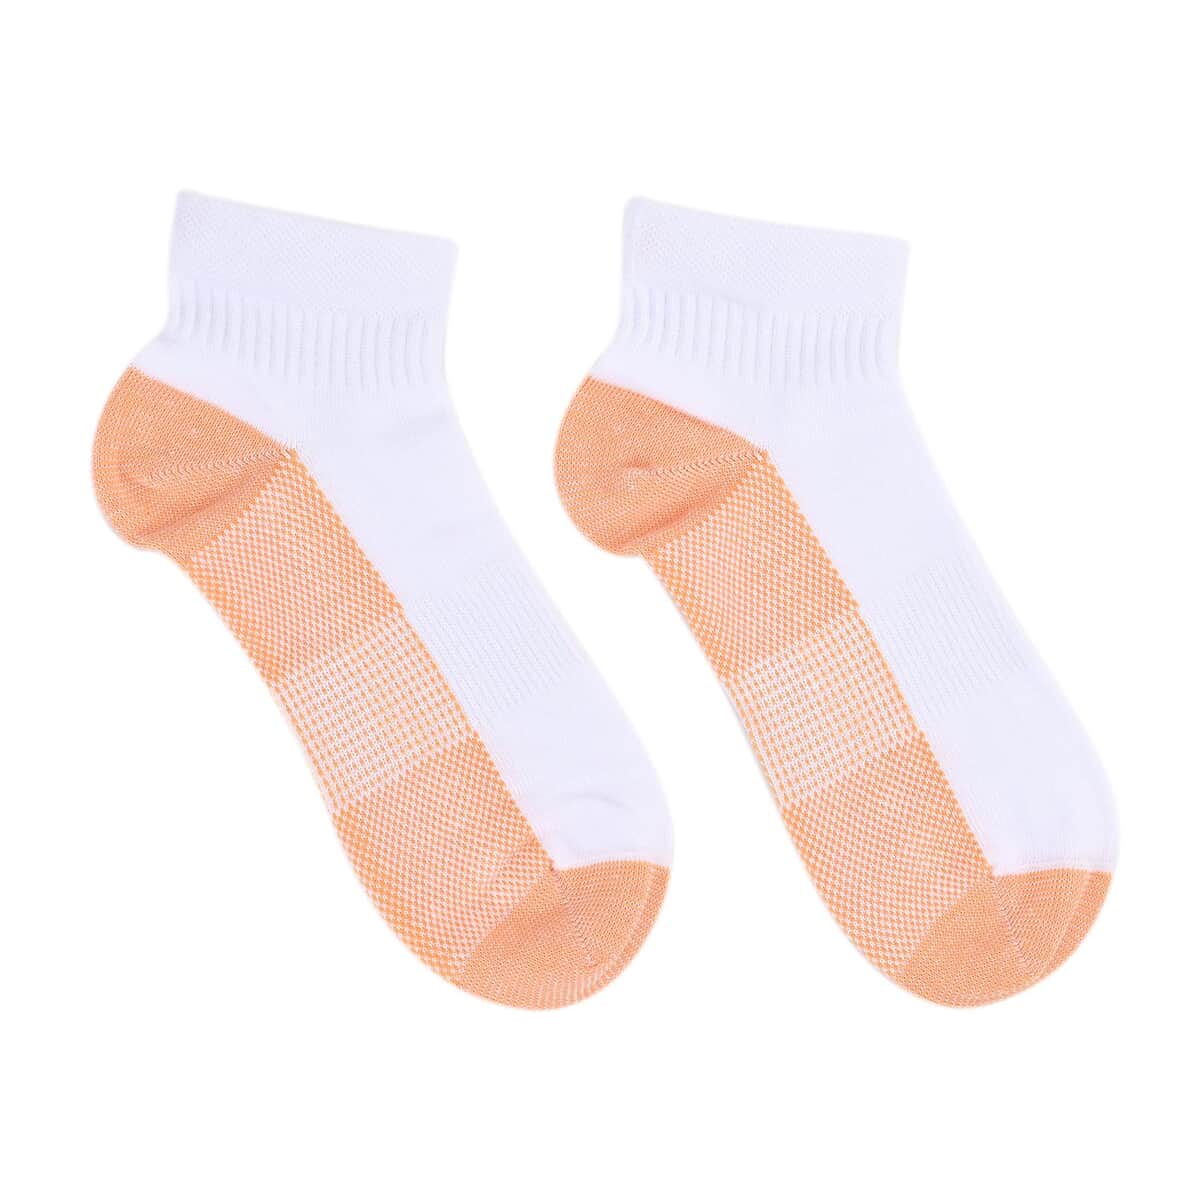 Set of 4 Pairs of Ankle Length Odor Free Copper Compression Socks For Men And Women, Premium Material Moisture Wicking Unisex Copper Infused Socks - White (L/XL) image number 1